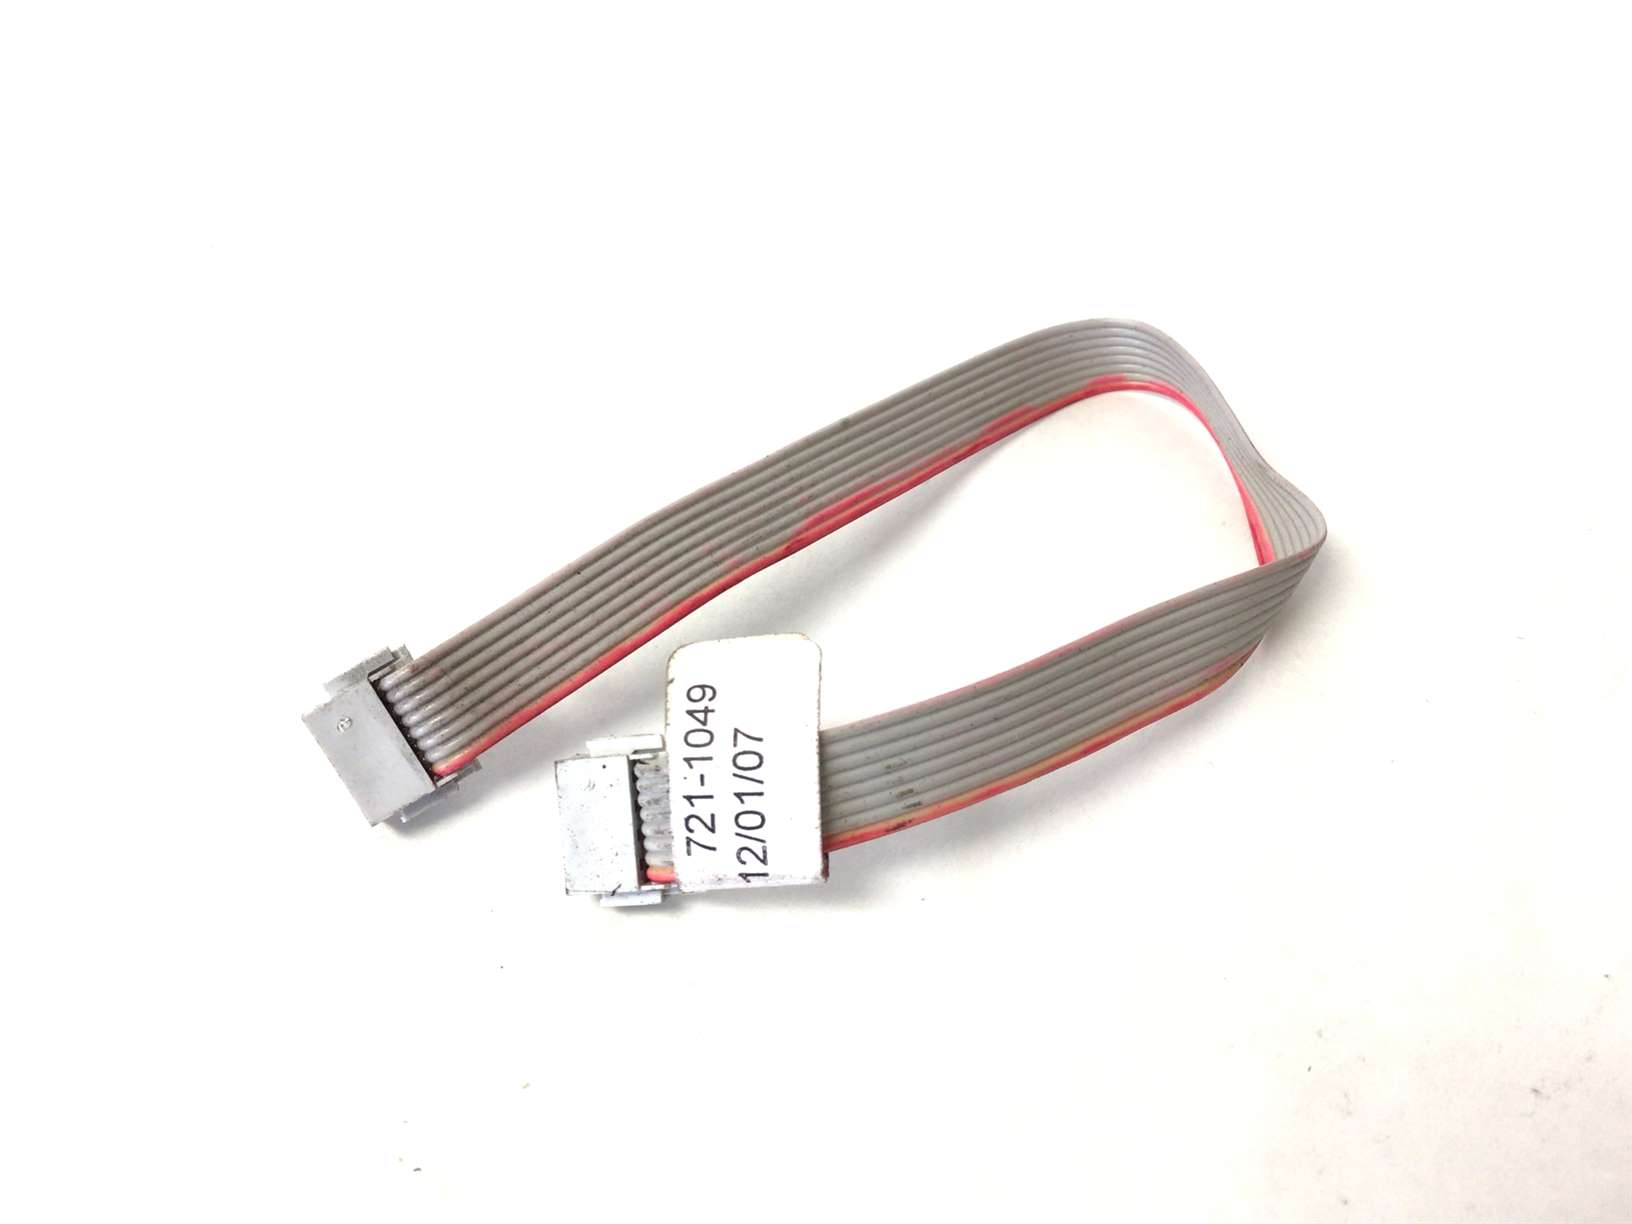 Assy Harness Ub Interface (Used)